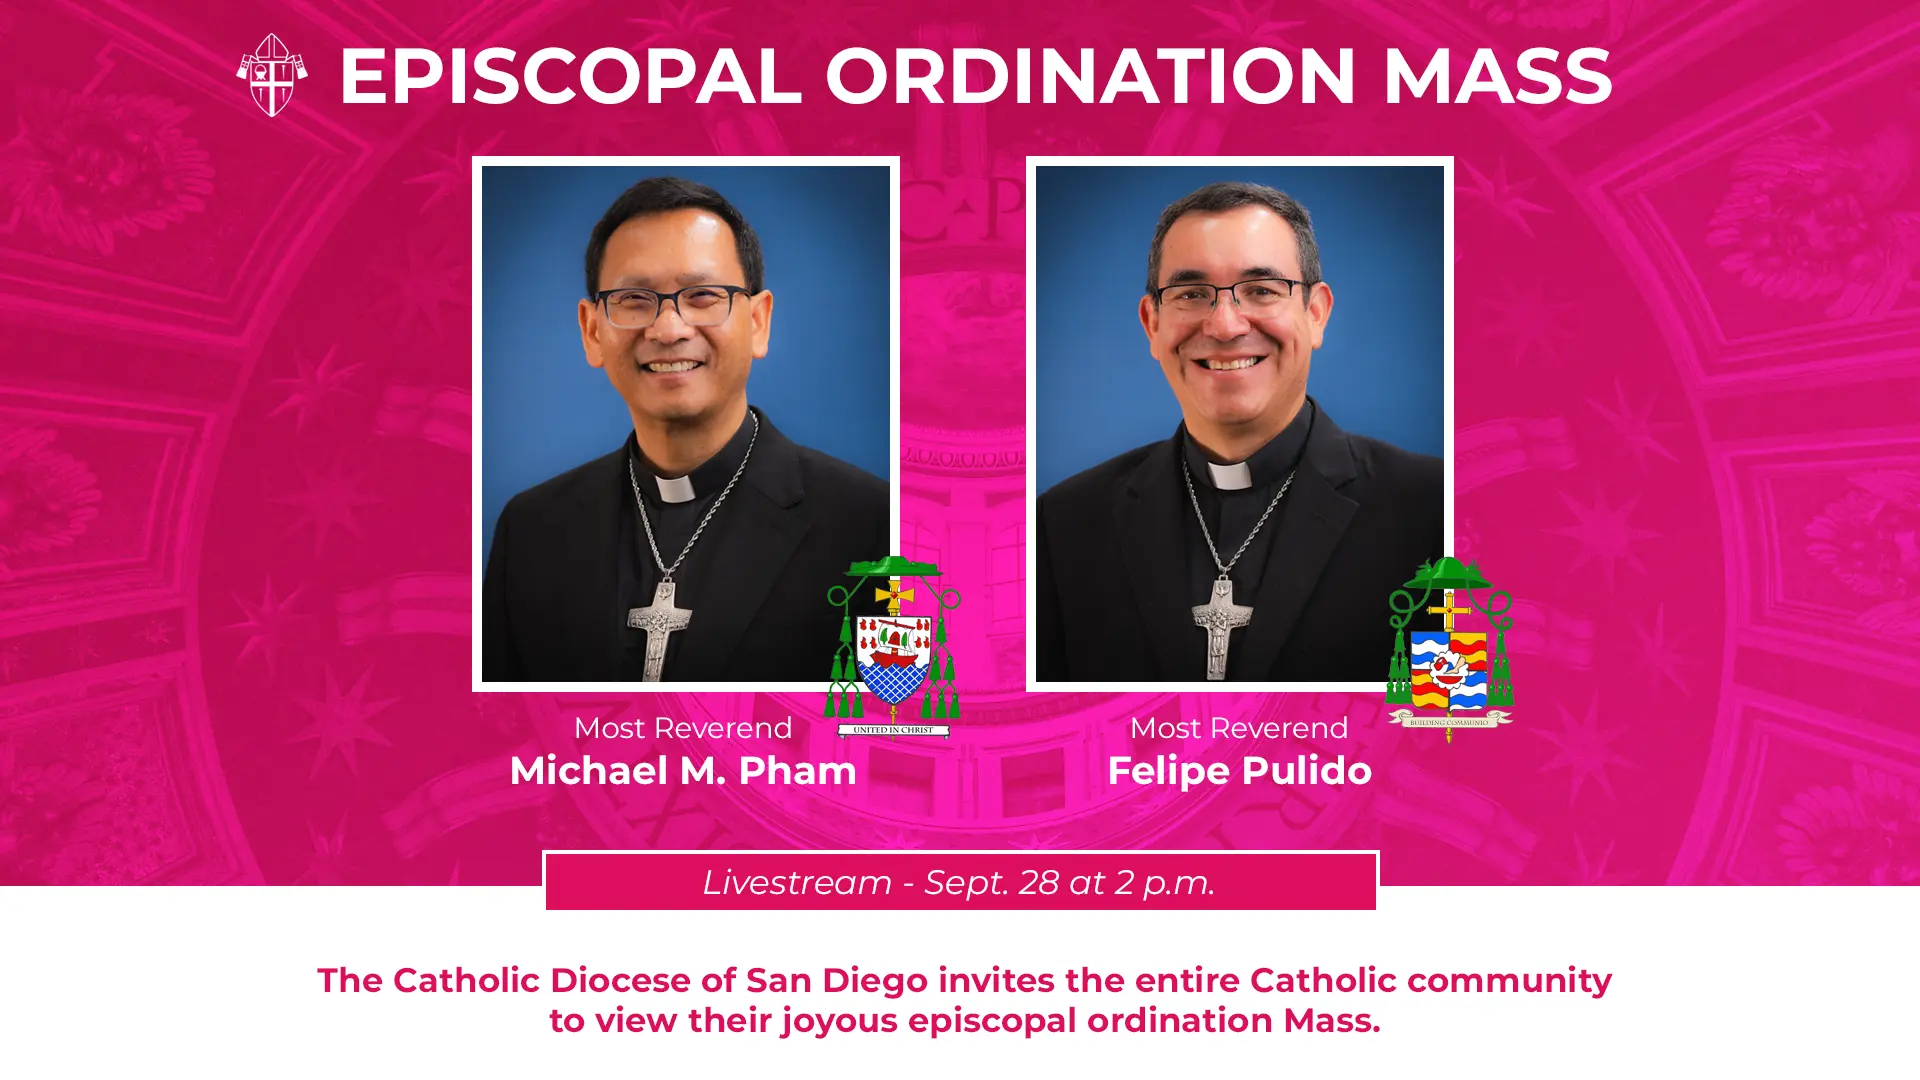 Livestream the Mass on Sept 28 at 2 PM